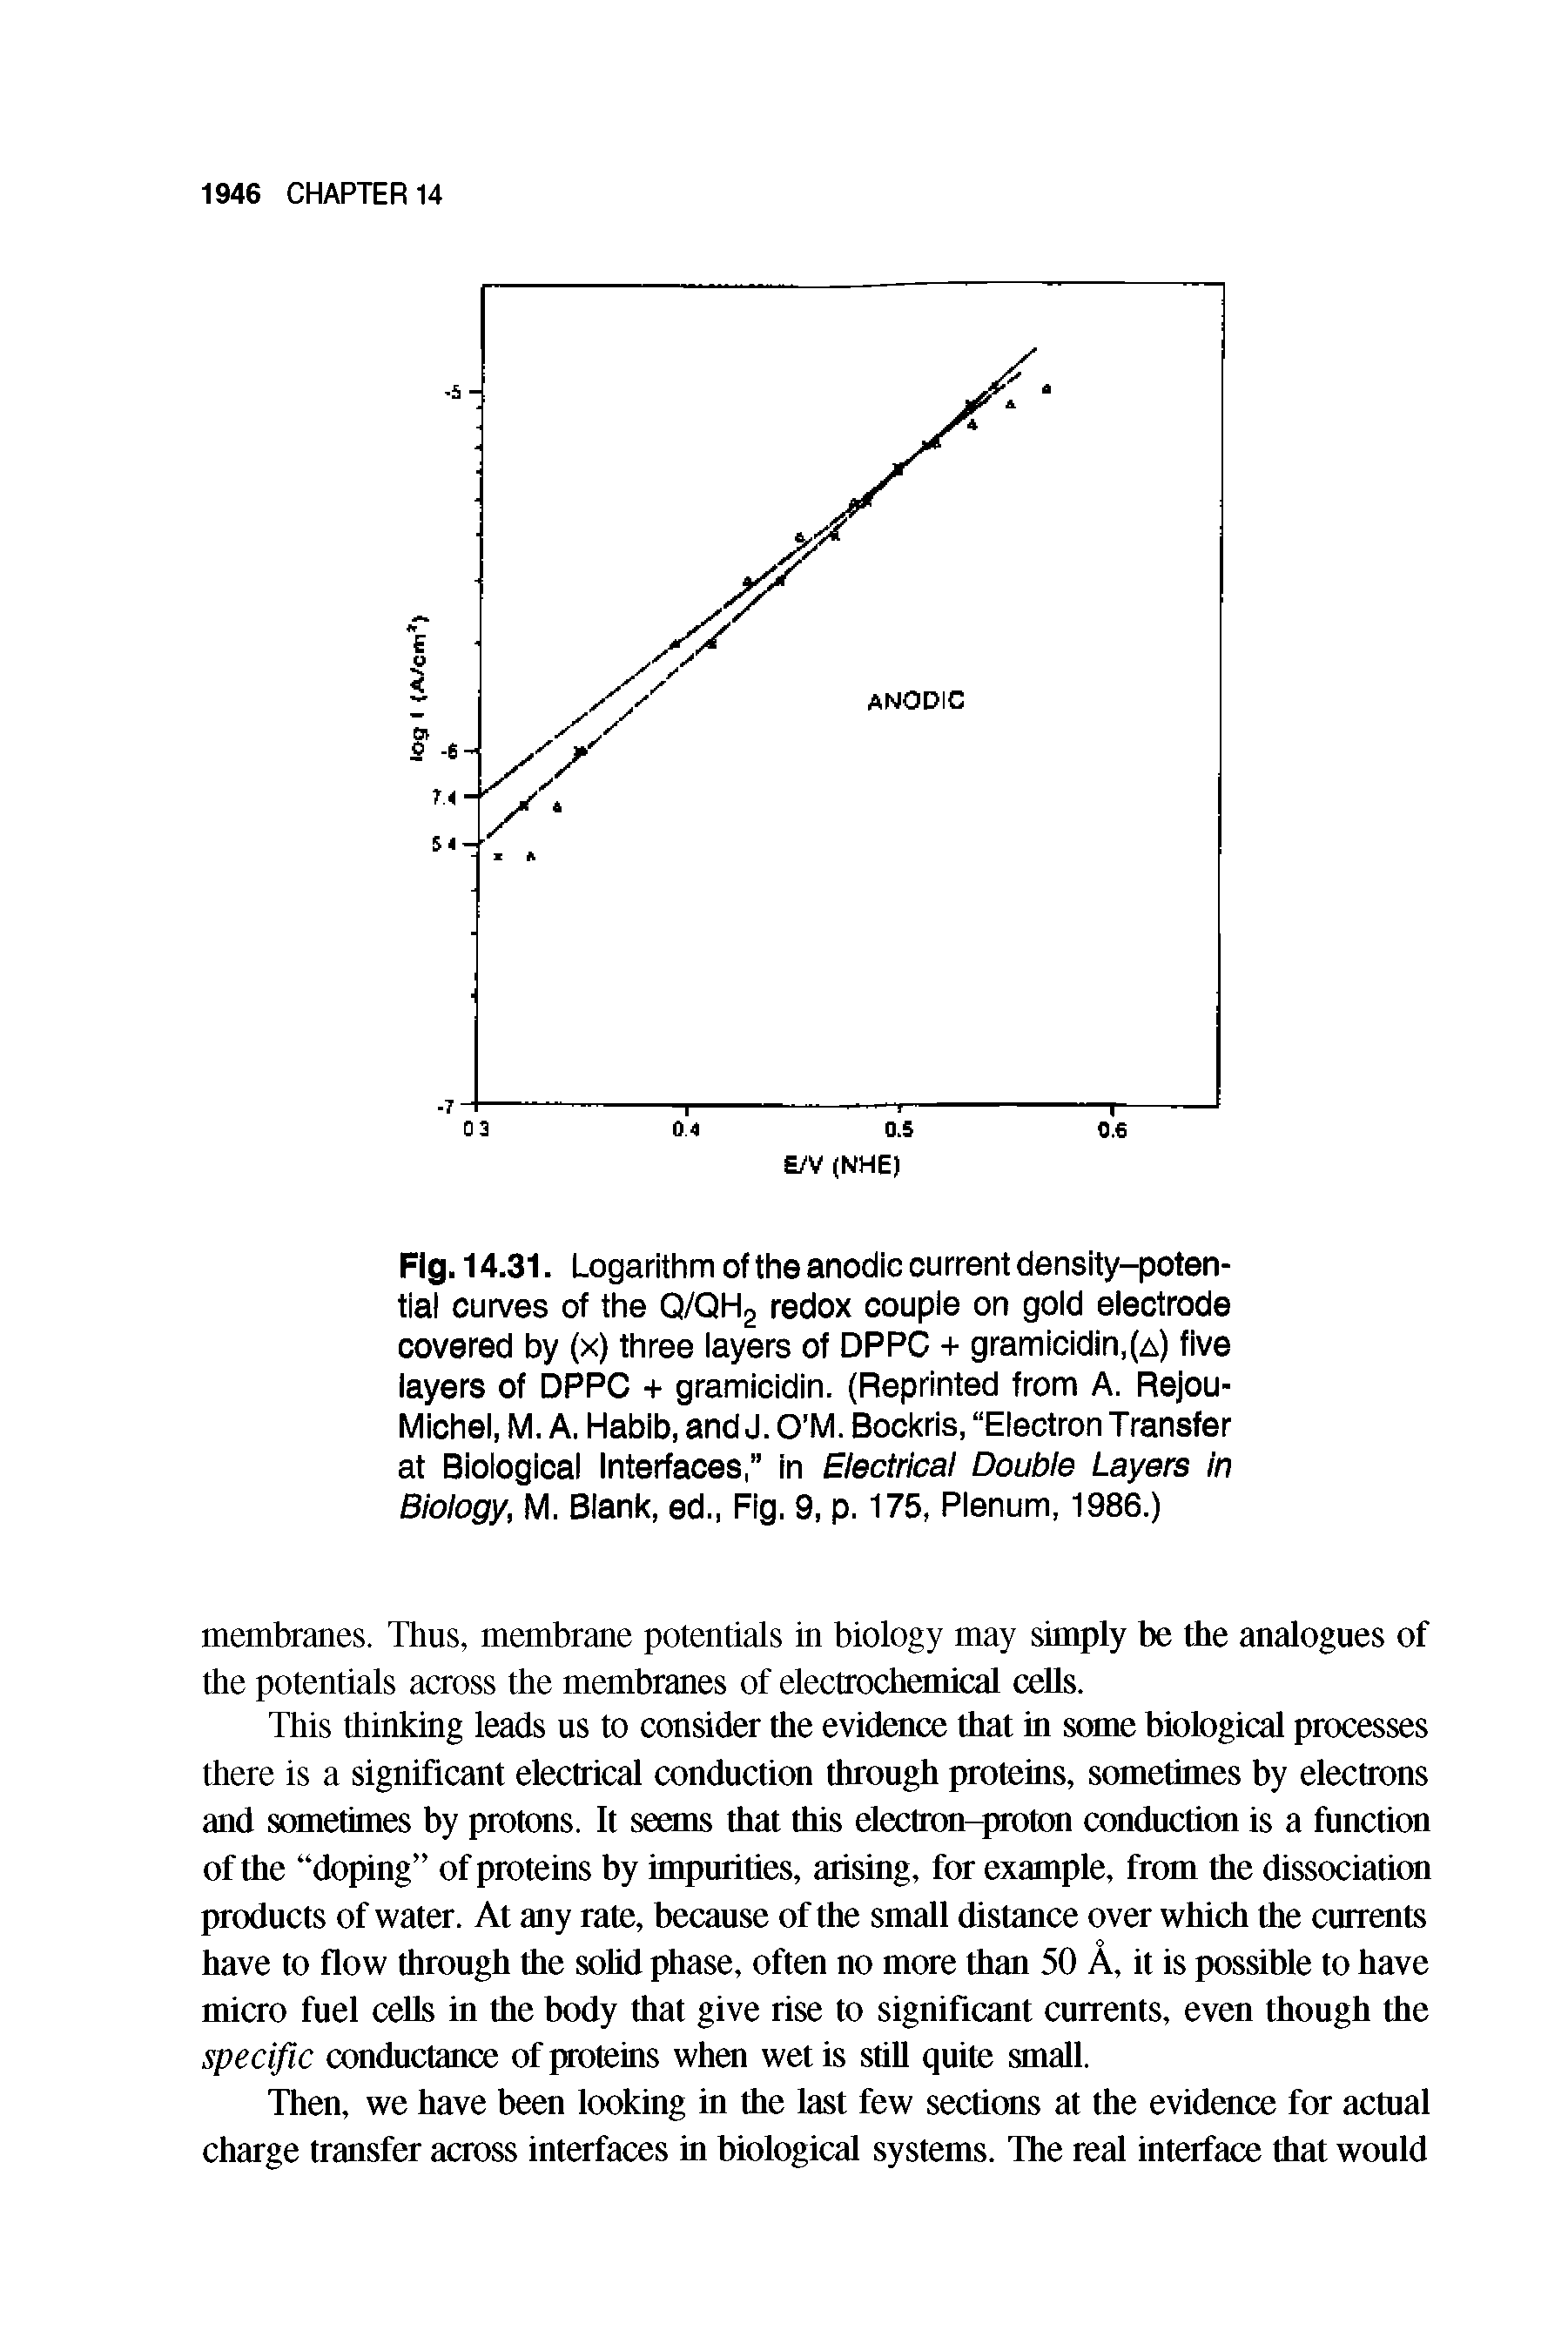 Fig. 14.31. Logarithm of the anodic current density-potential curves of the Q/QH2 redox couple on gold electrode covered by (x) three layers of DPPC + gramicidin,(a) five layers of DPPC + gramicidin. (Reprinted from A. Rejou-Michel, M. A. Habib, and J. O M. Bockris, Electron Transfer at Biological Interfaces, in Electrical Double Layers in Biology, M. Blank, ed., Fig. 9, p. 175, Plenum, 1986.)...